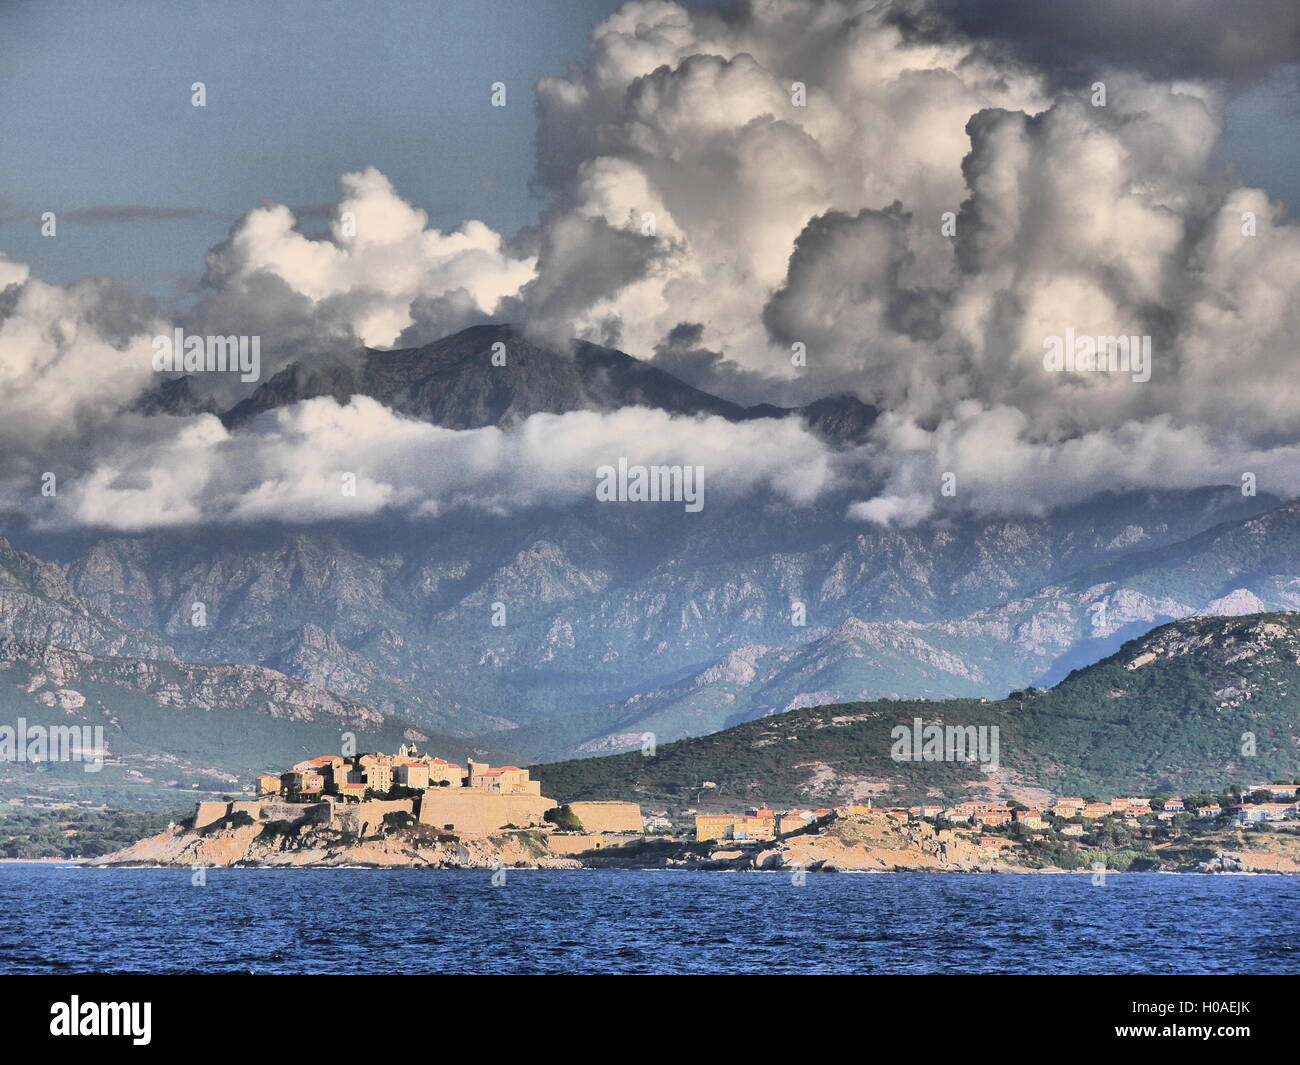 High contrast view from the sea of Corsica's Citadel with mountains and swirling clouds in background Stock Photo